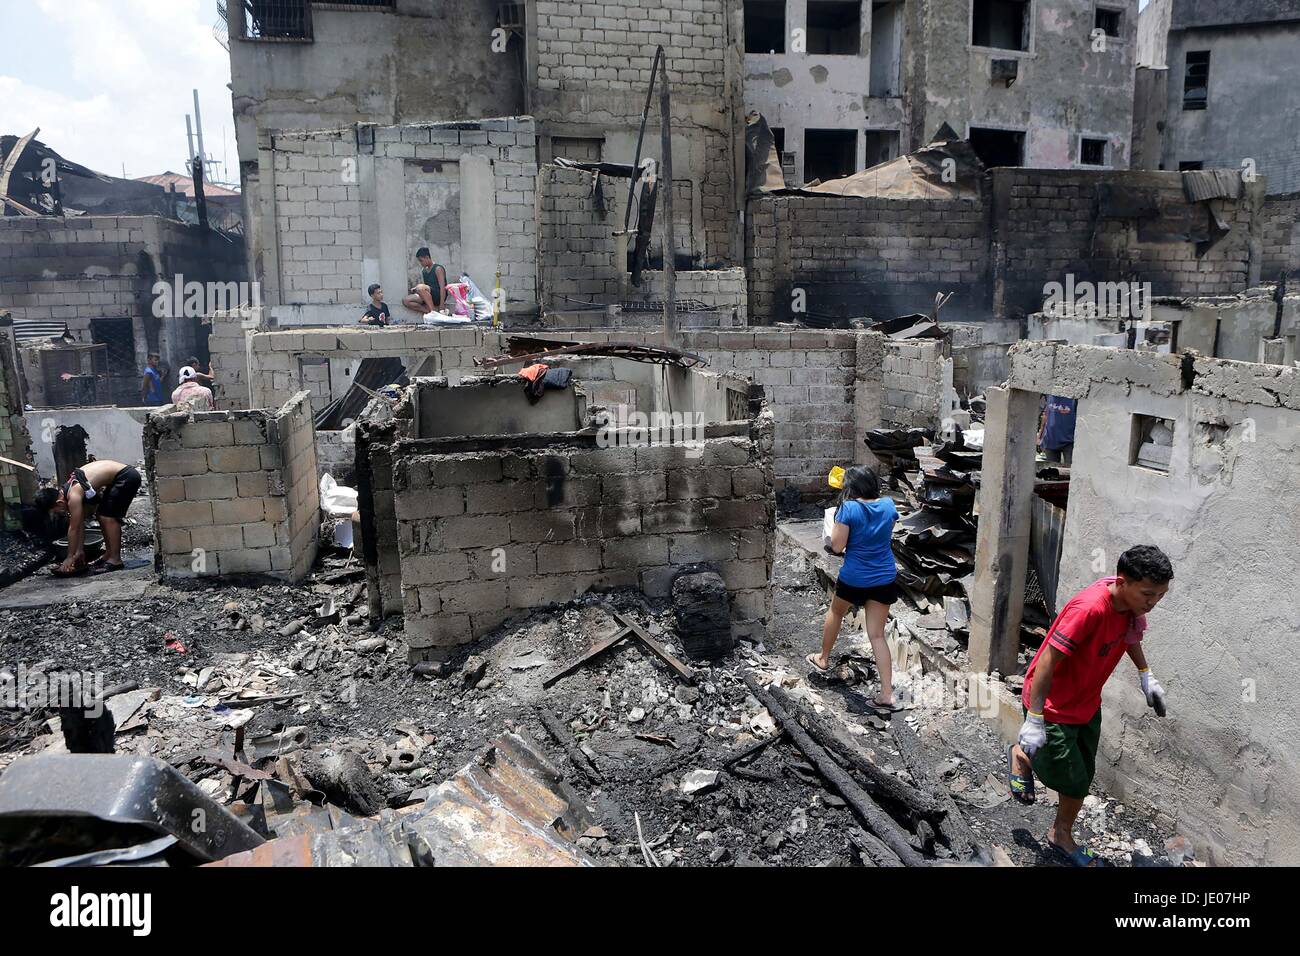 Manila, Philippines. 22nd June, 2017. Residents look for reusable materials from their burnt home after a fire at a residential area in Manila, the Philippines, June 22, 2017. More than 100 shanties were razed in the fire, leaving 200 families homeless. Credit: Rouelle Umali/Xinhua/Alamy Live News Stock Photo